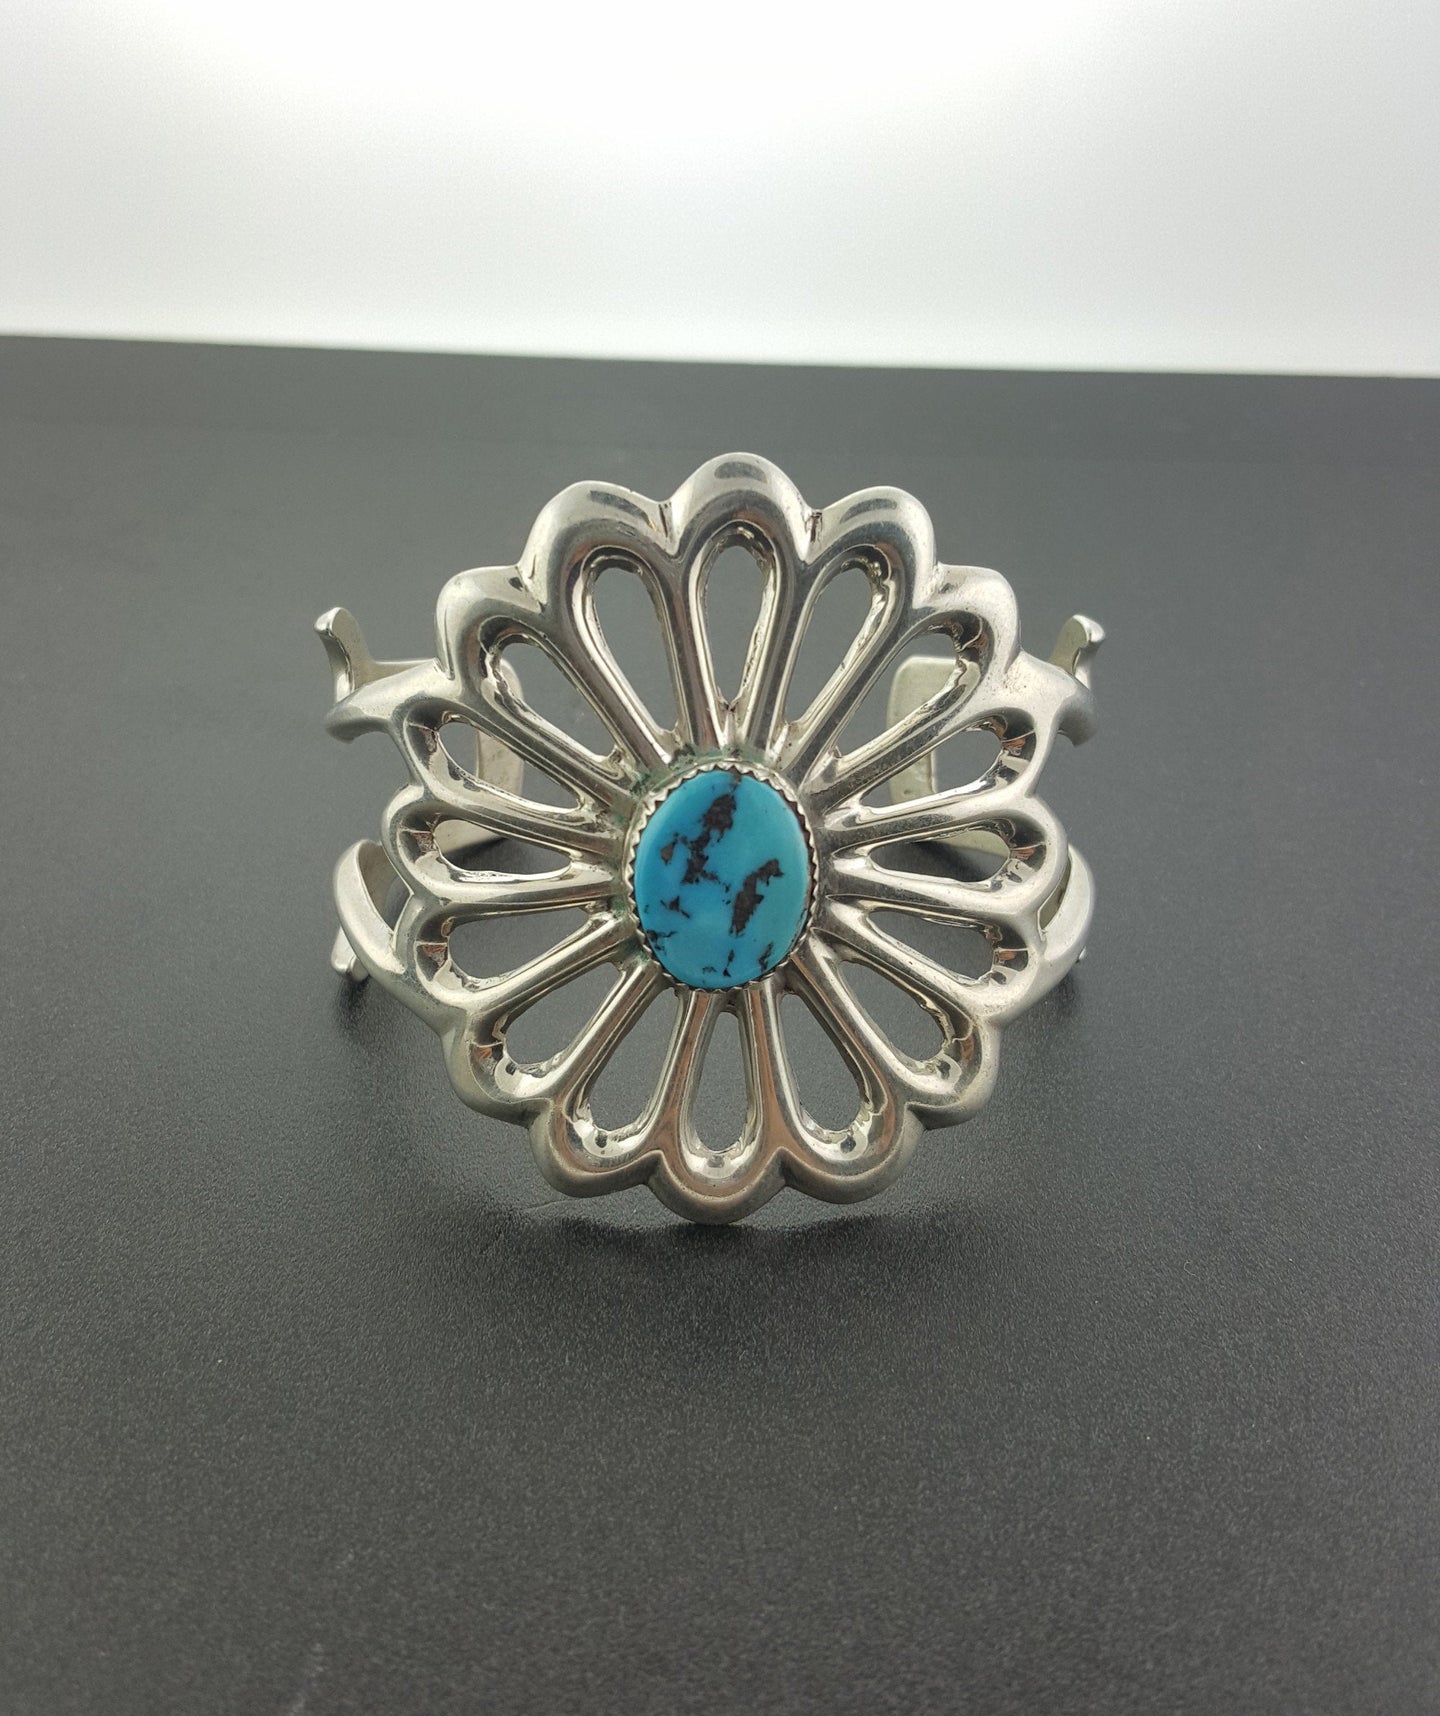 Big sterling silver flower cuff bracelet with Kingman turquoise stone